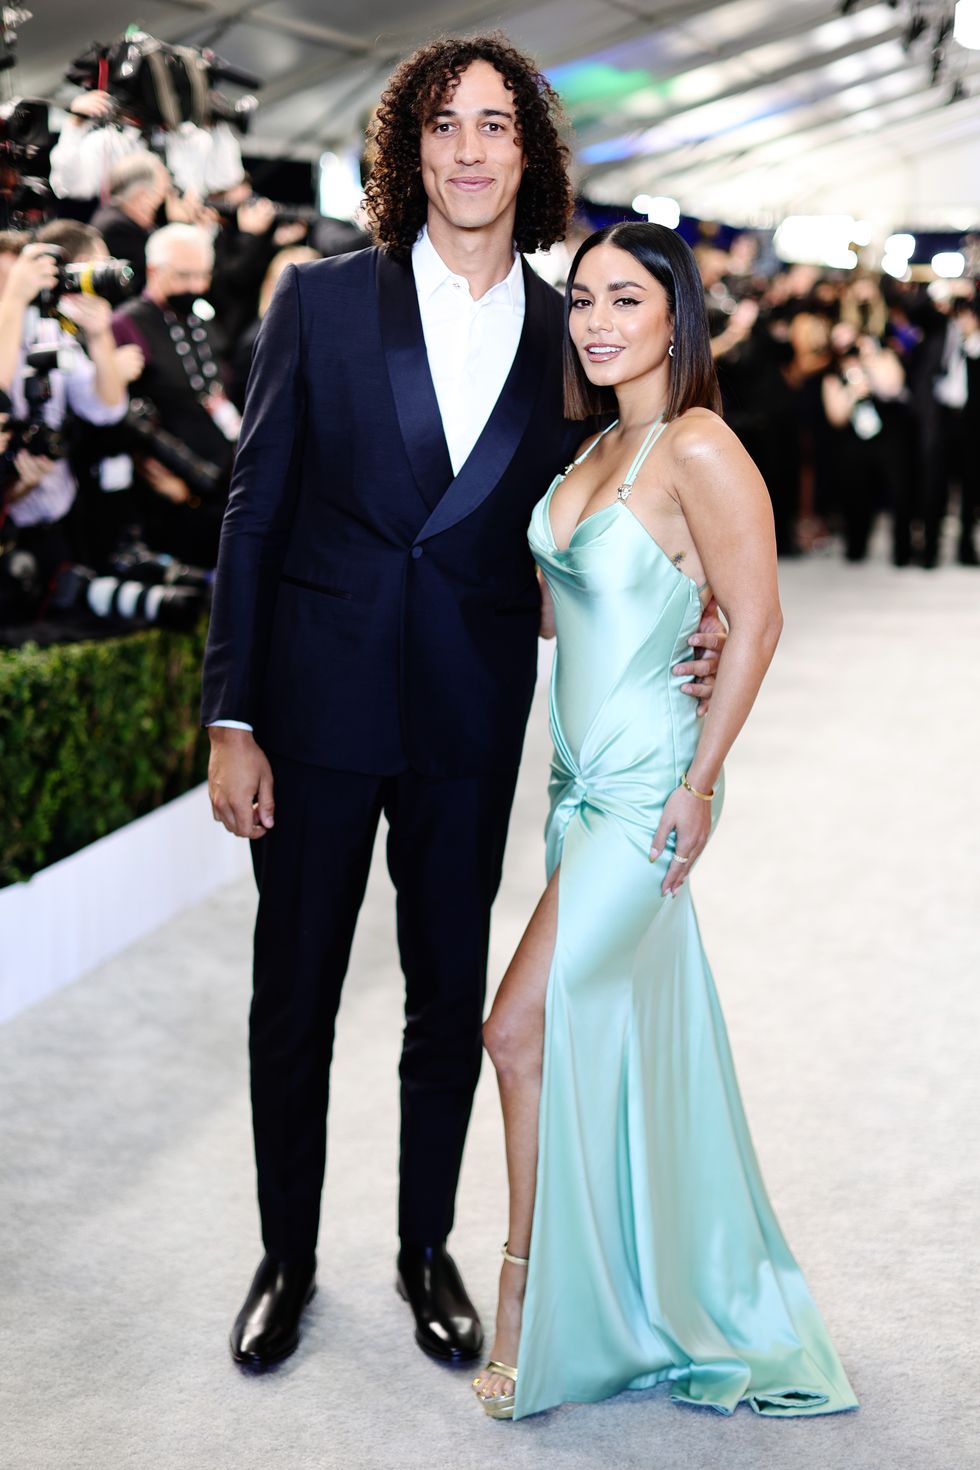 cole tucker and vanessa hudgens at the 28th screen actors guild awards in february 2022